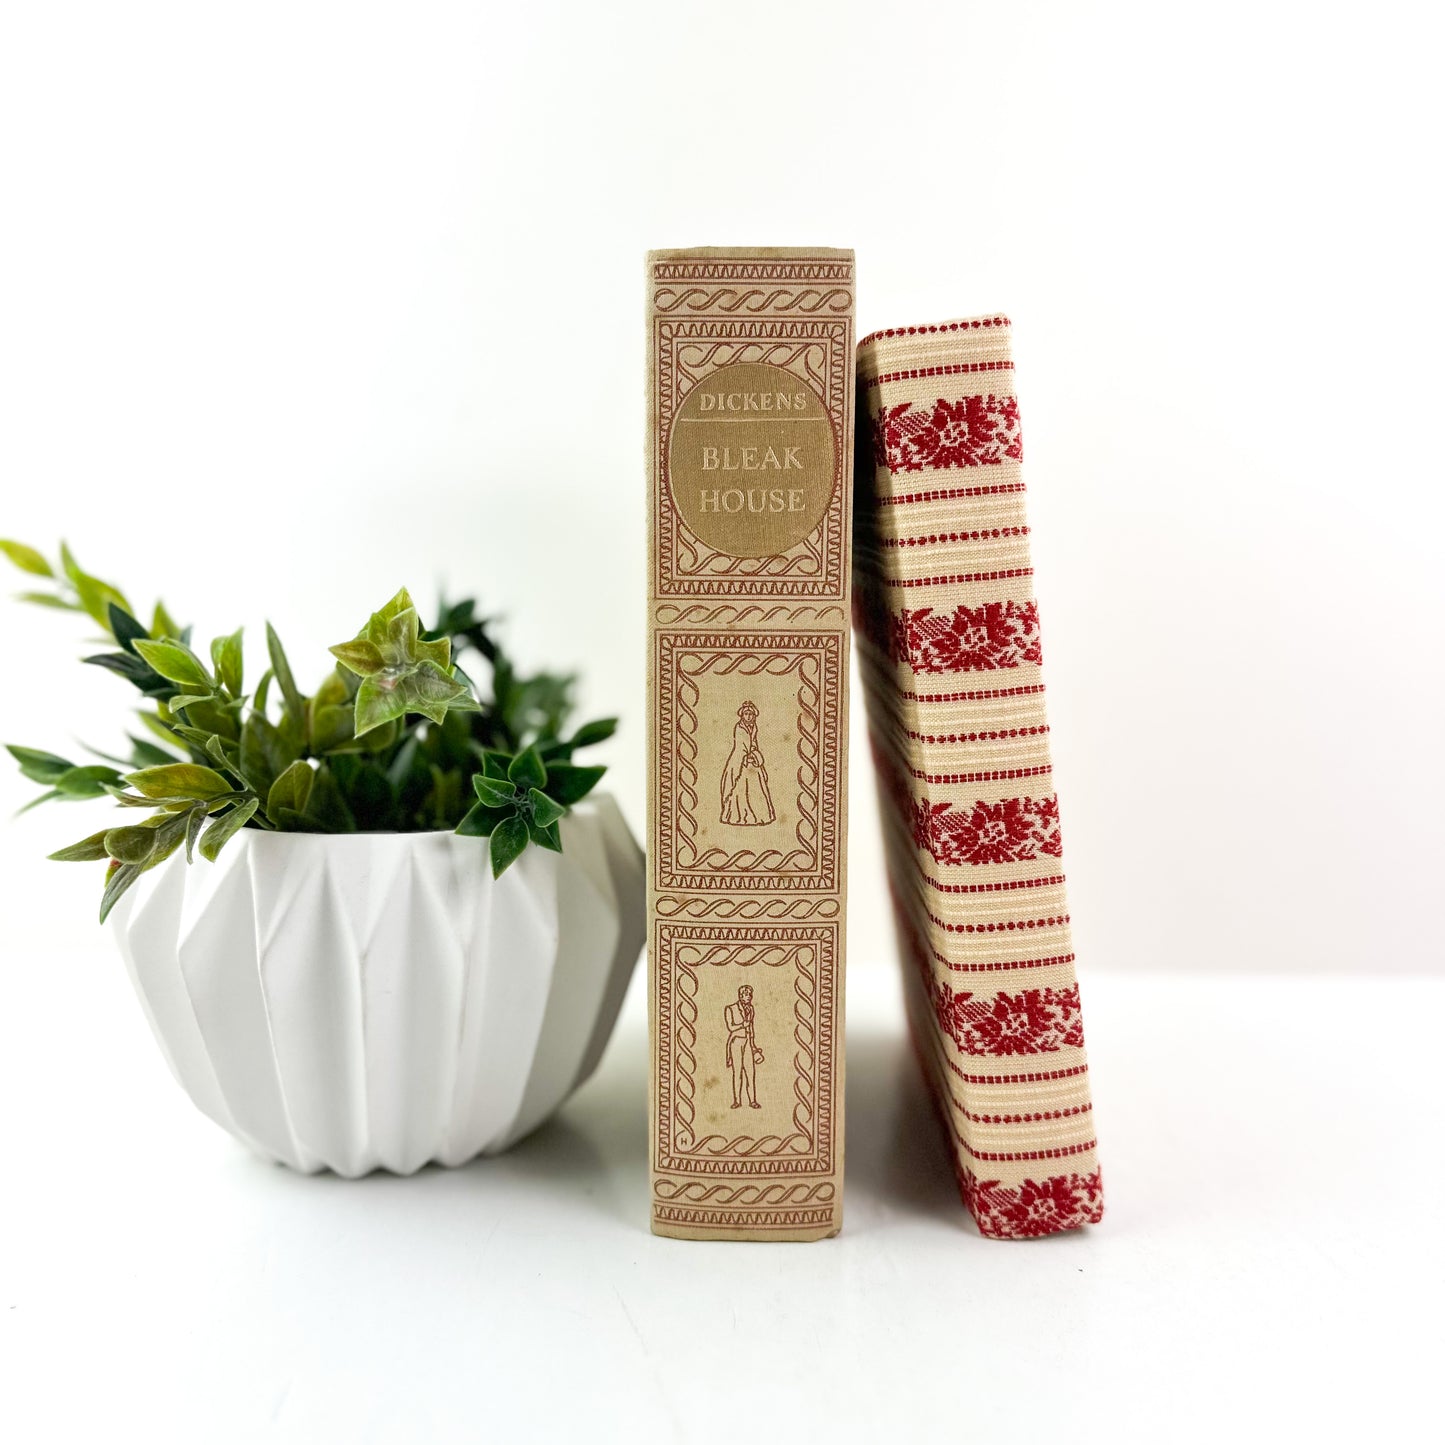 Decorative Book Set with Dickens Vintage Book